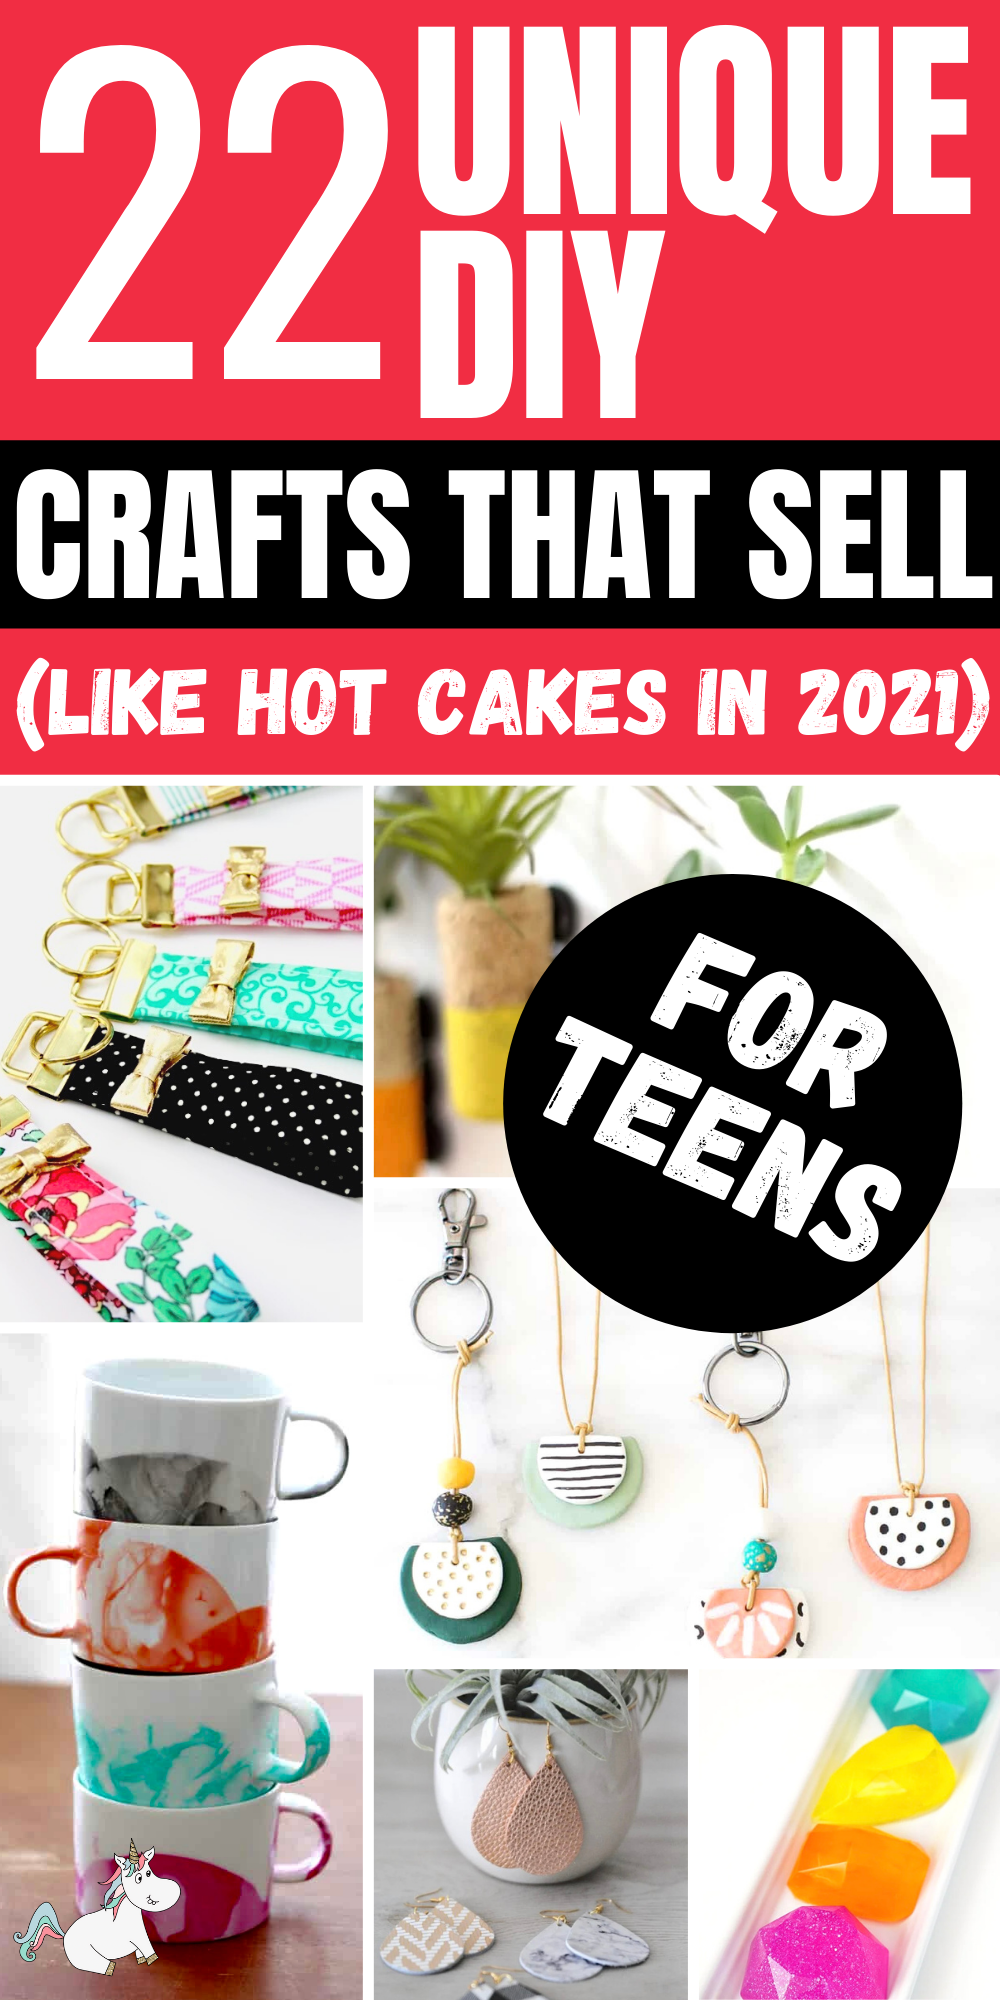 22 Unique Teen Crafts To Make And Sell: This roundup of teen crafts to make and sell from the Mummy Front is a great list of cheap and easy crafts that sell like hotcakes in 2021. Your find jewelry, soaps, keychains and other crafts that are perfect for beginners... You will definitely need to save this list for when you need a great craft to sell! #craftstomakeandsell #craftsforteens #makemoneyfromhome #crafts #easycrafts